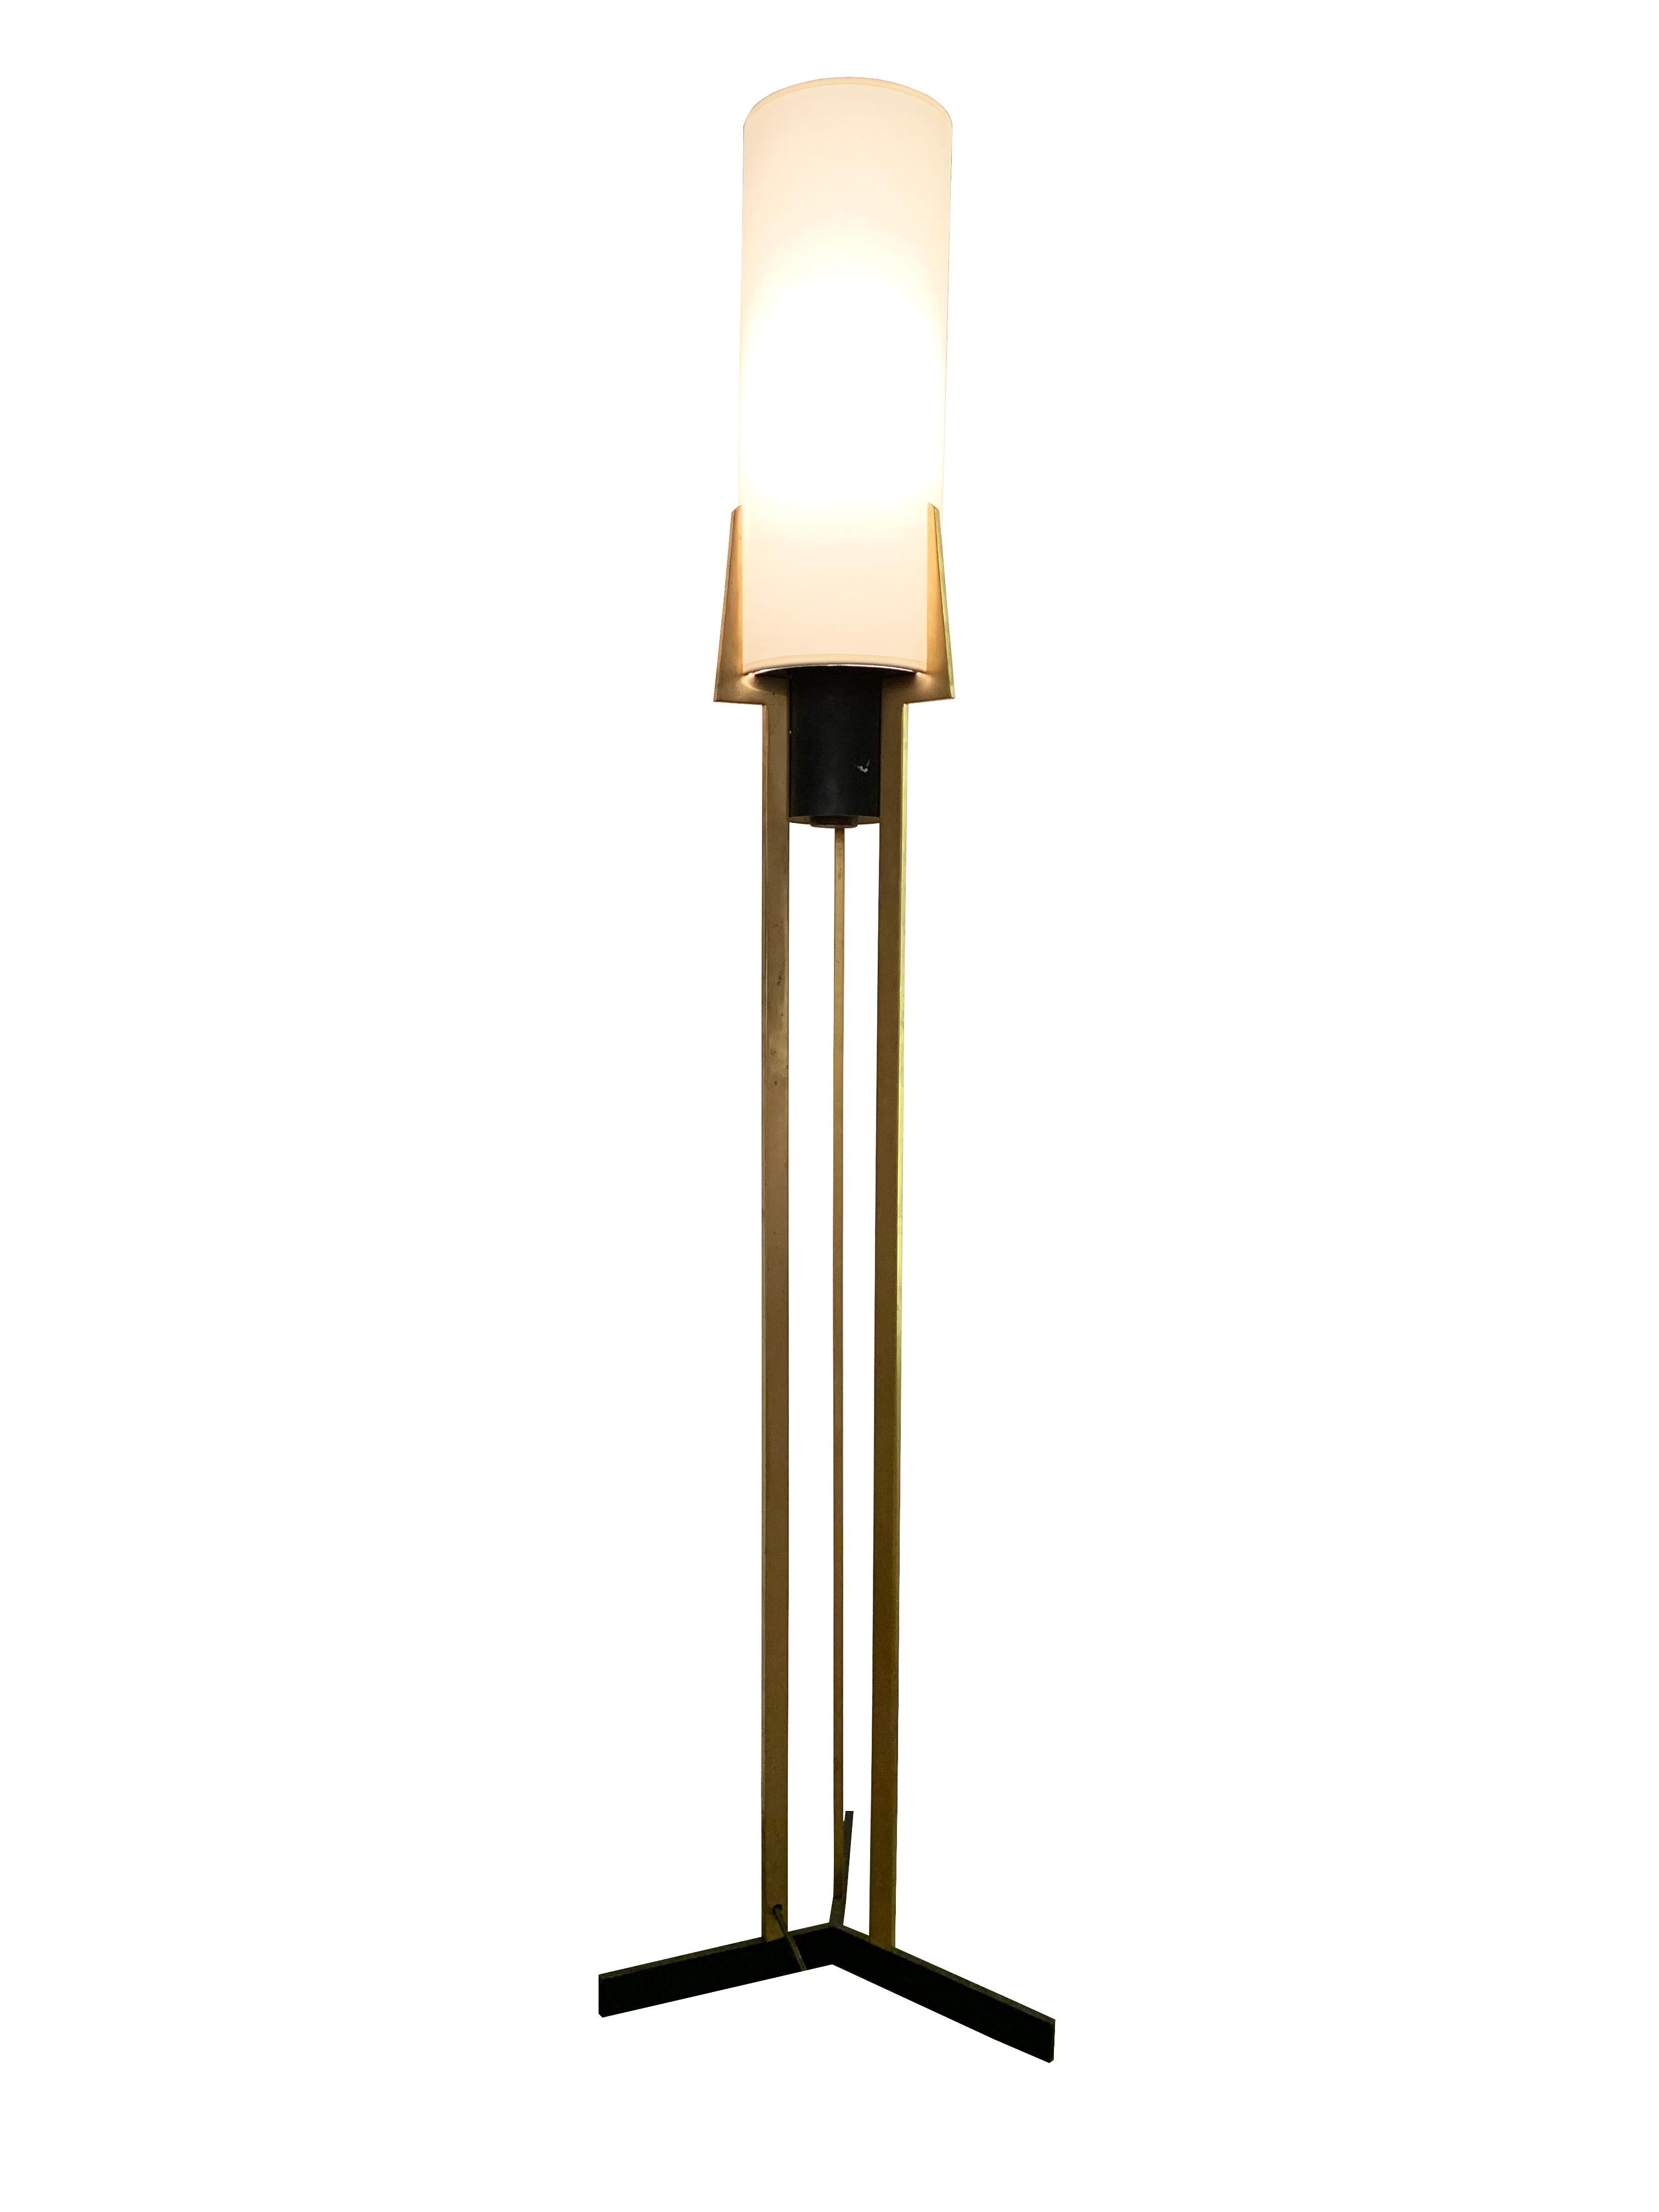 20th Century Pair of Floor Lamps by Maison Arlus 1950